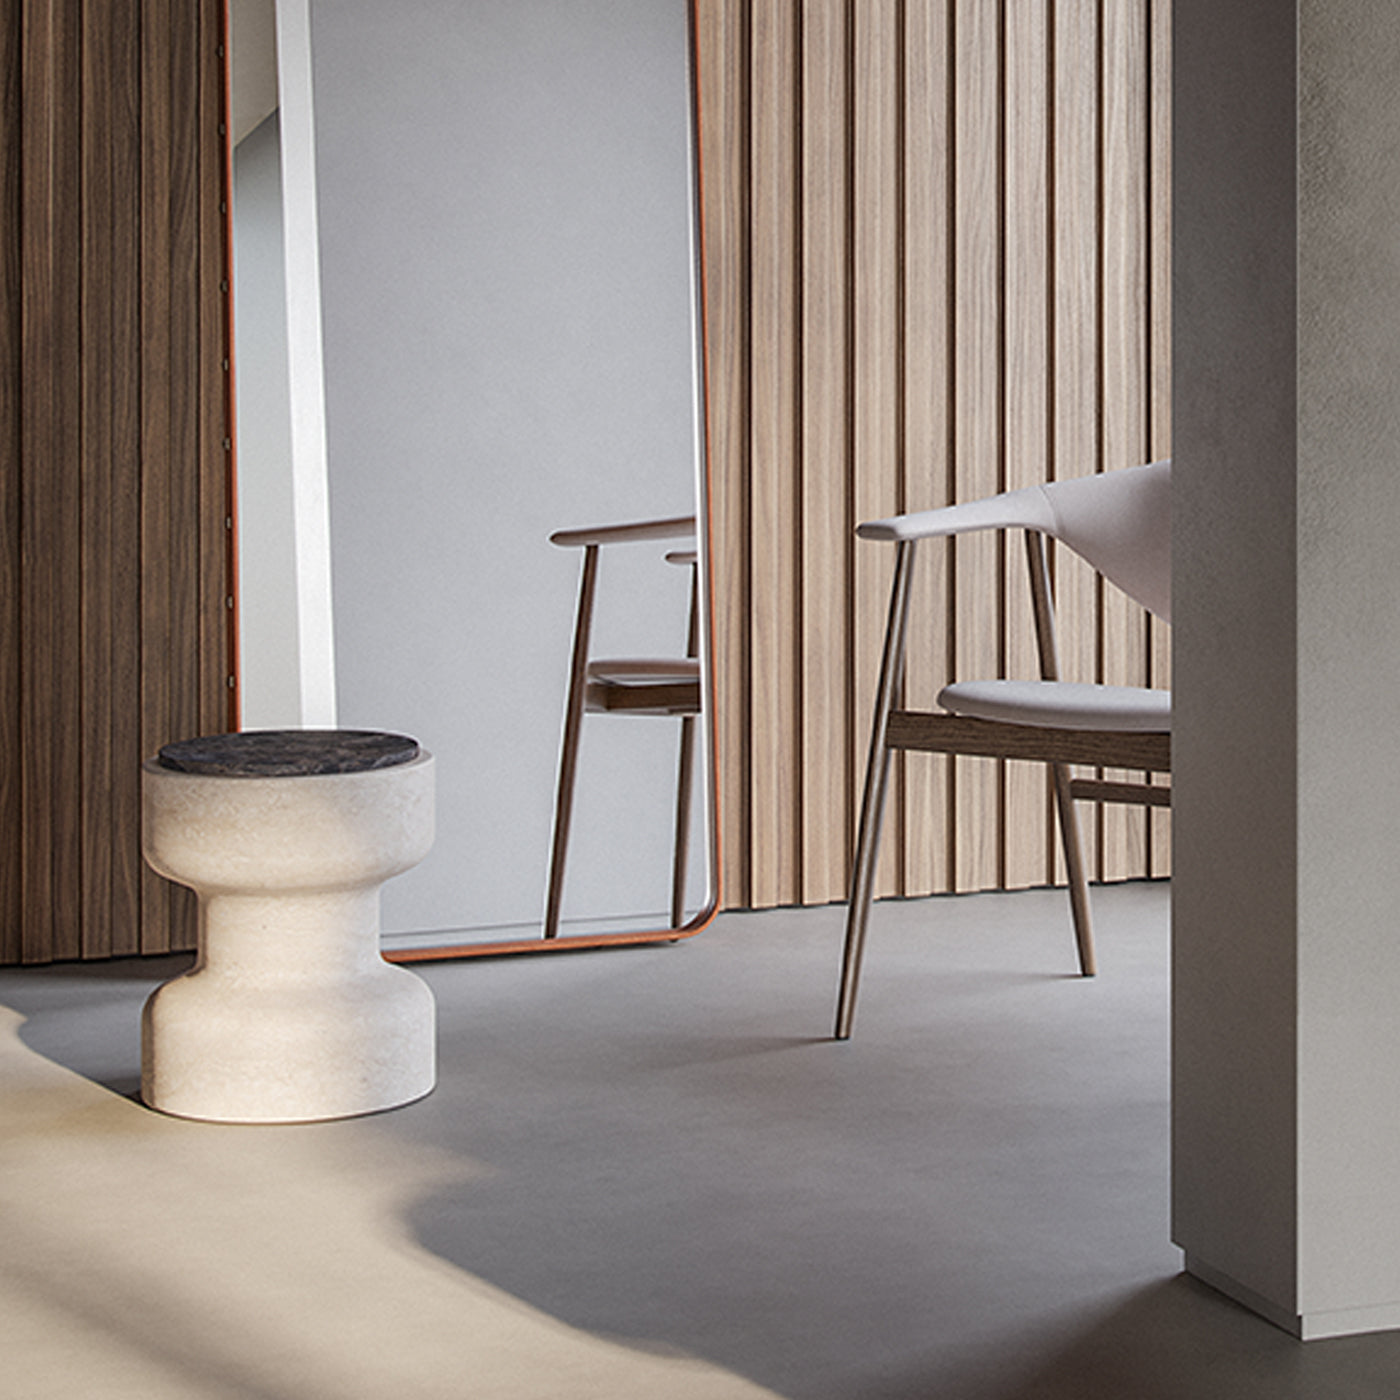 Tivoli Stool in travertine and marble by Ivan Colominas - Alternative view 3